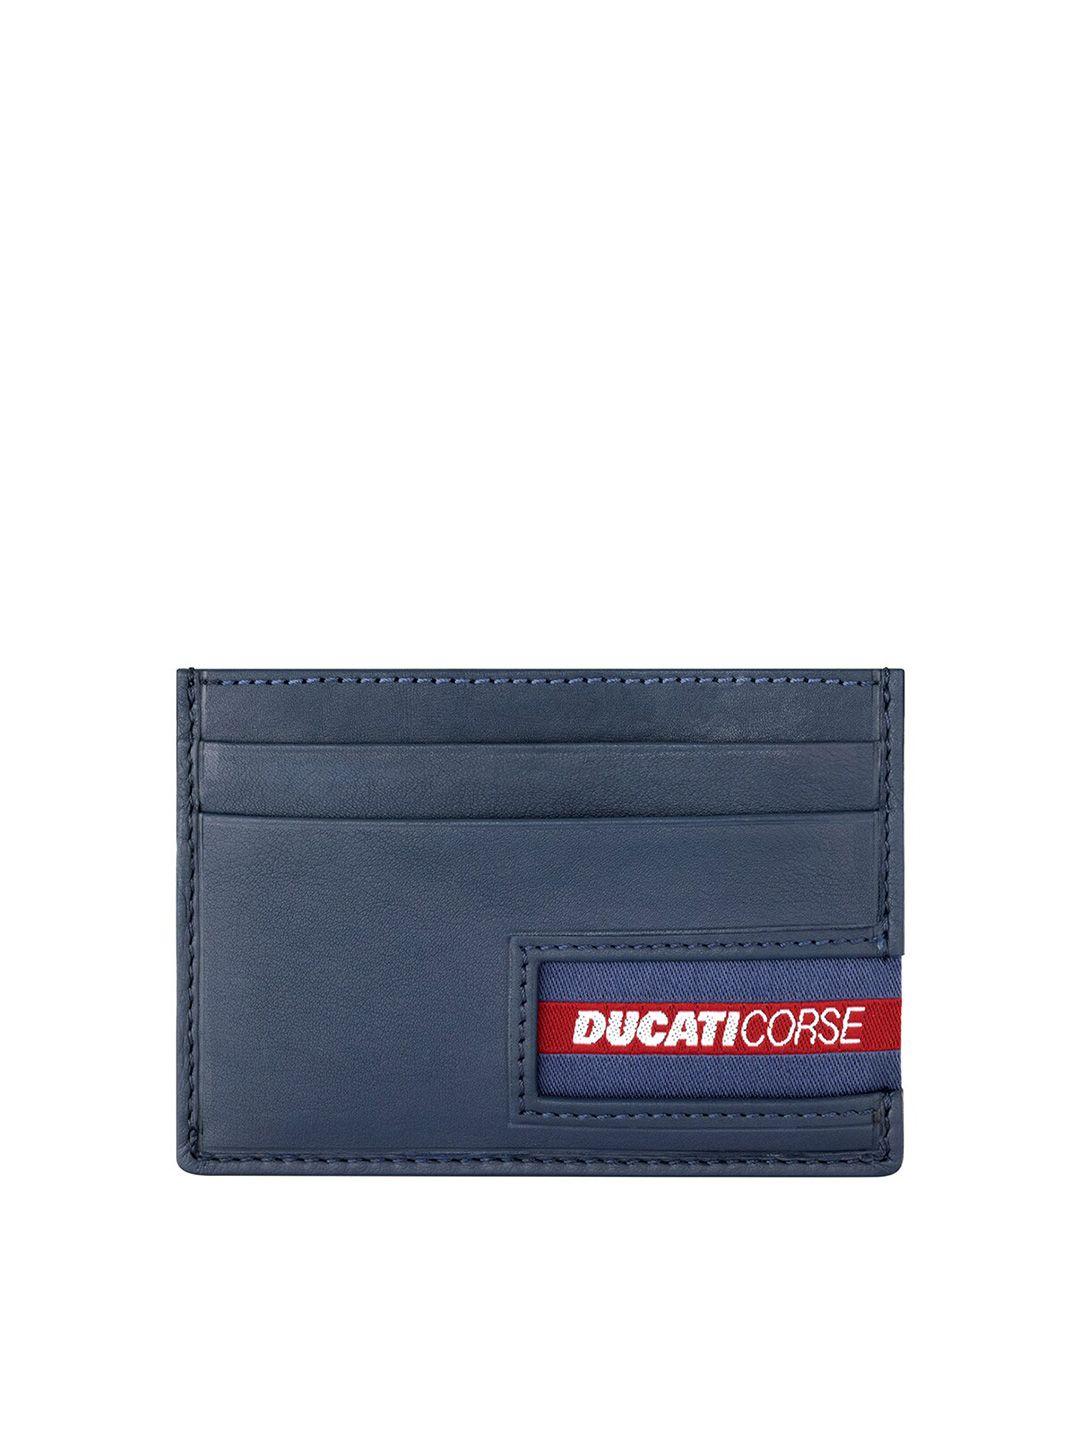 ducati-corse-men-blue-&-red-leather-card-holder